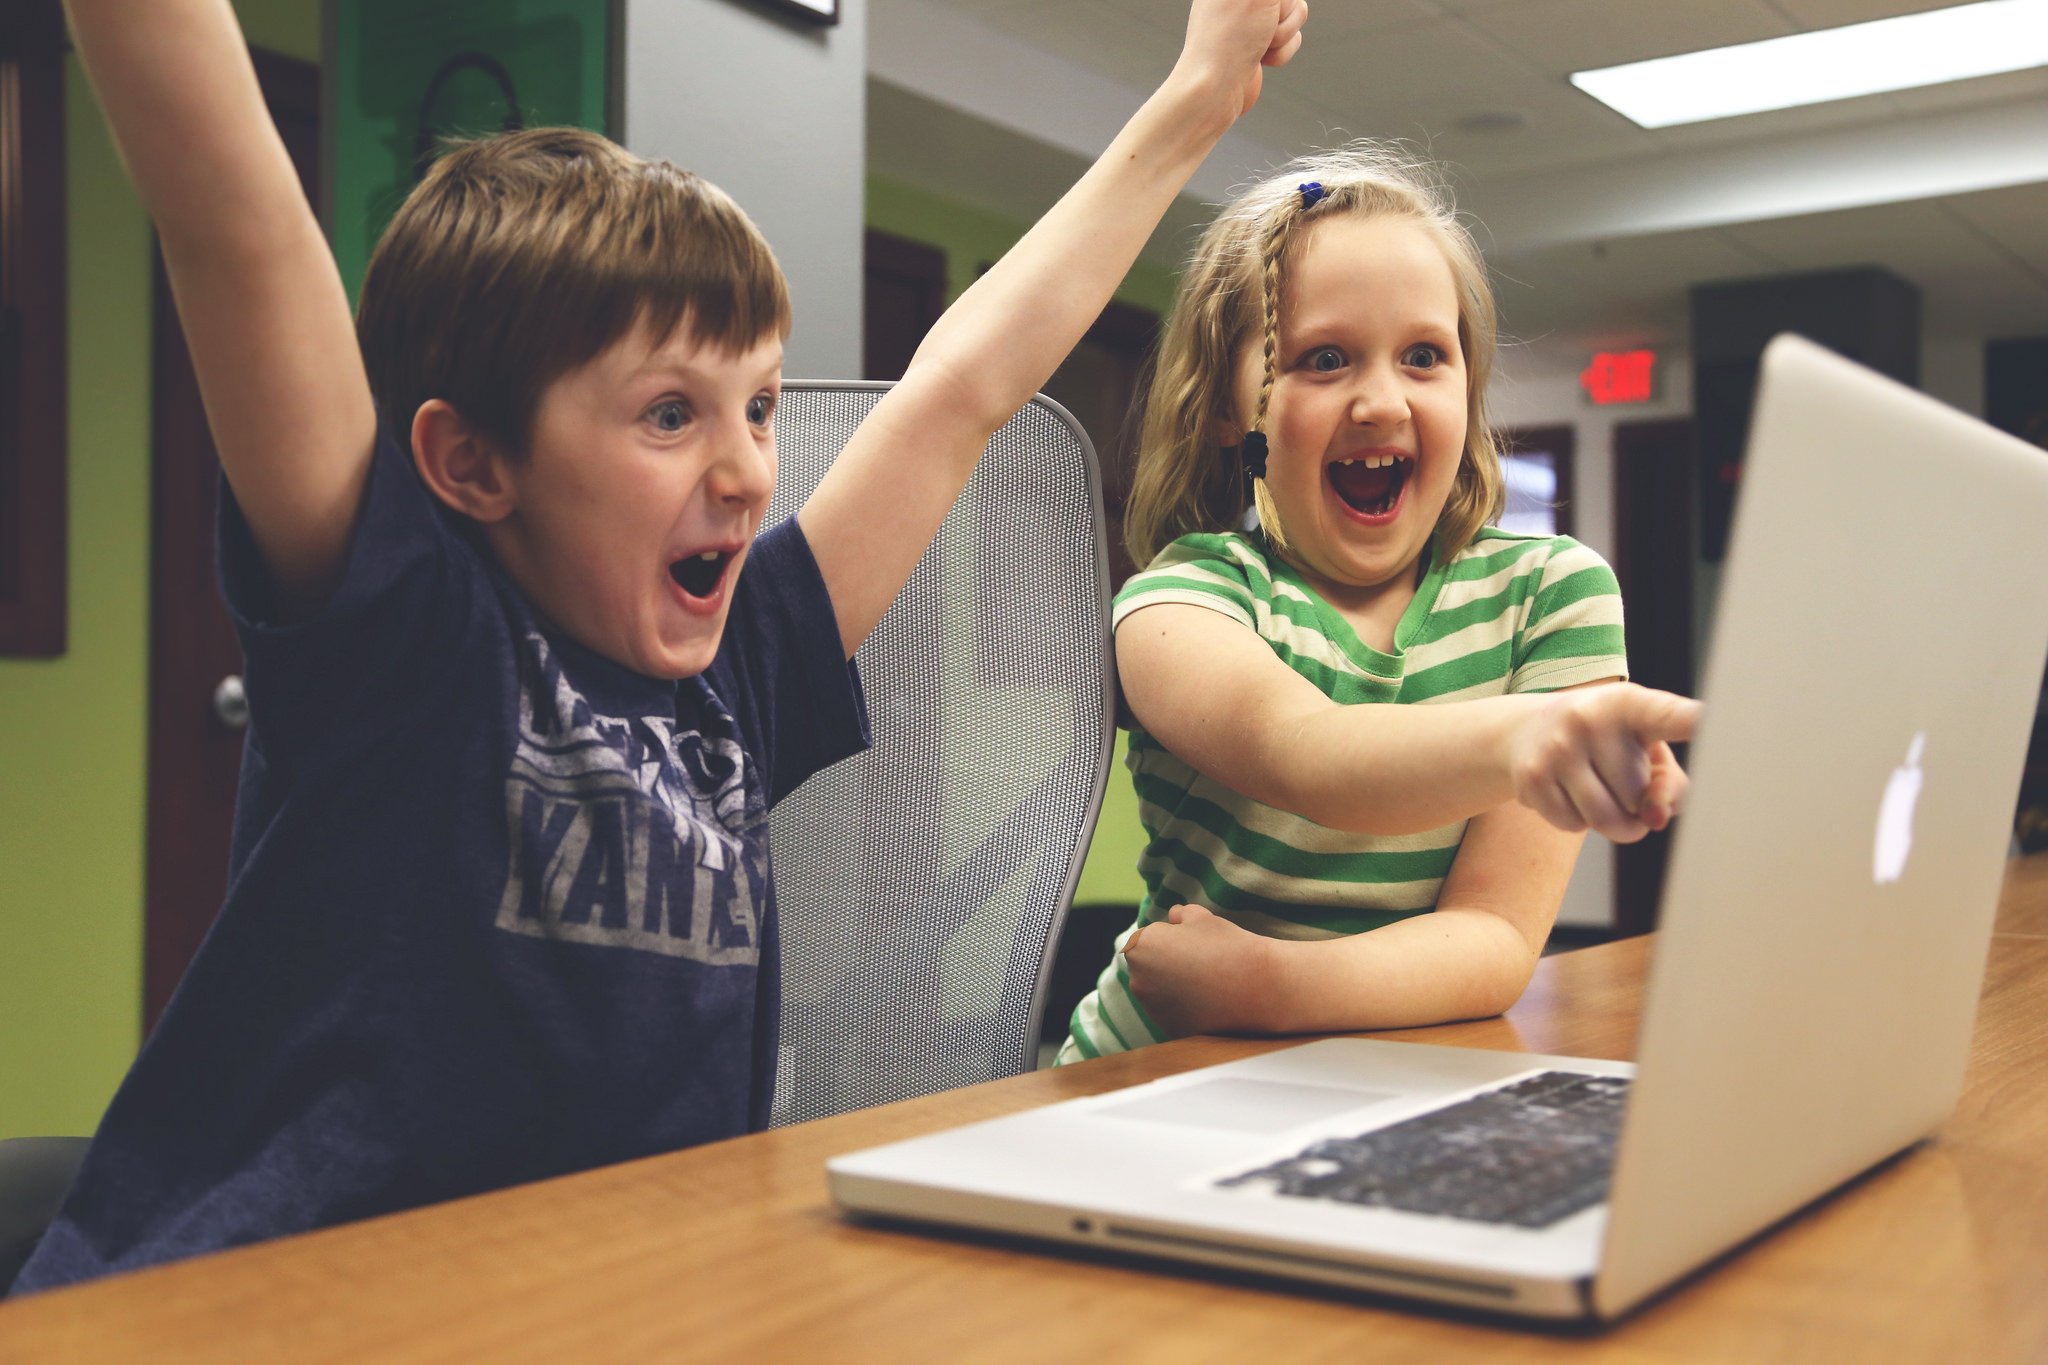 5 Most Important Internet Rules All Children Should Learn